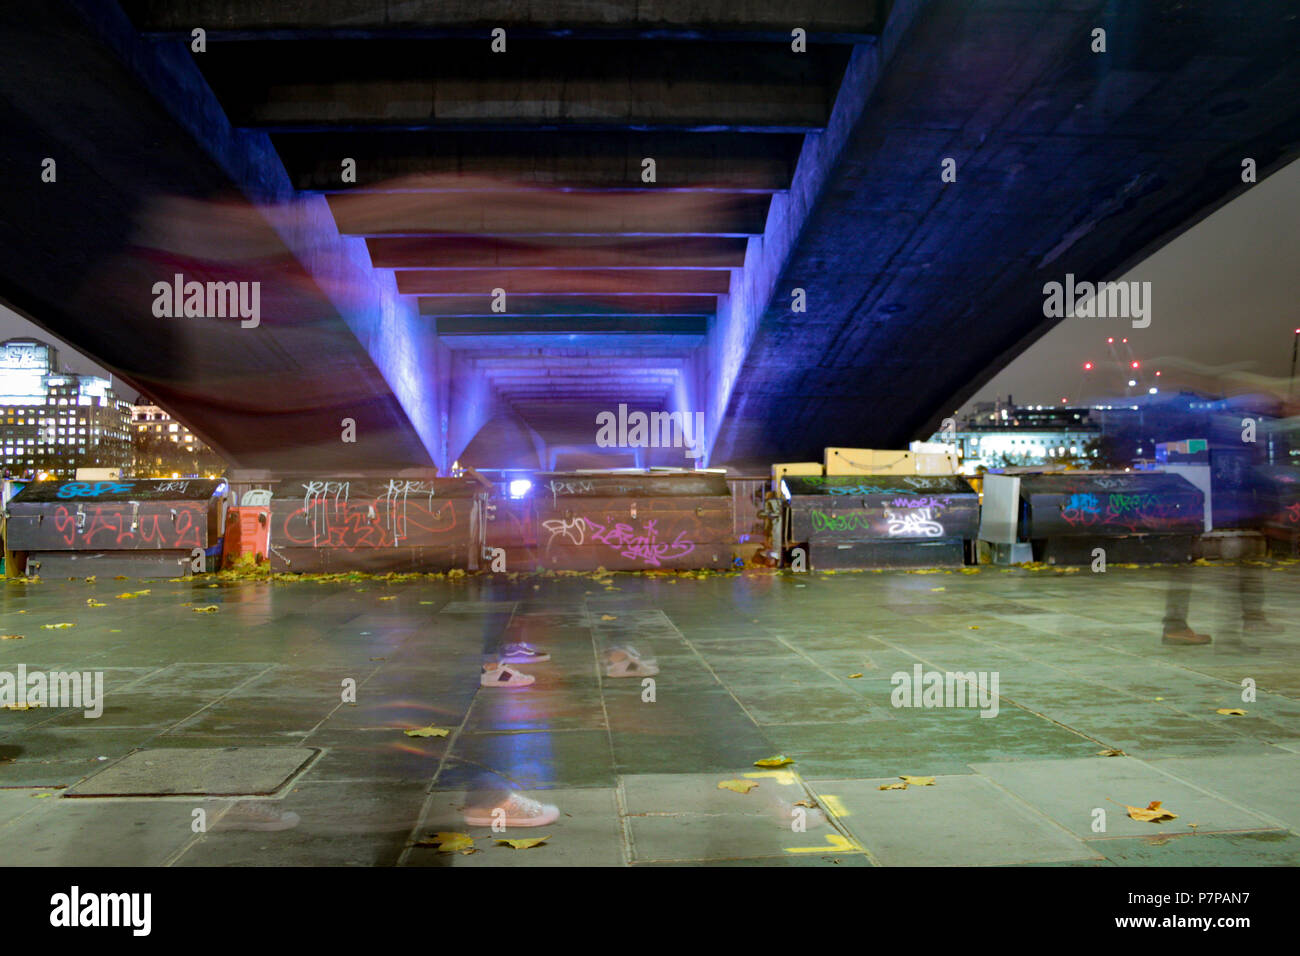 Underside of a graffiti covered concrete bridge - South Bank of the Thames, London. Long exposure with blurred feet adding movement to the image. Stock Photo